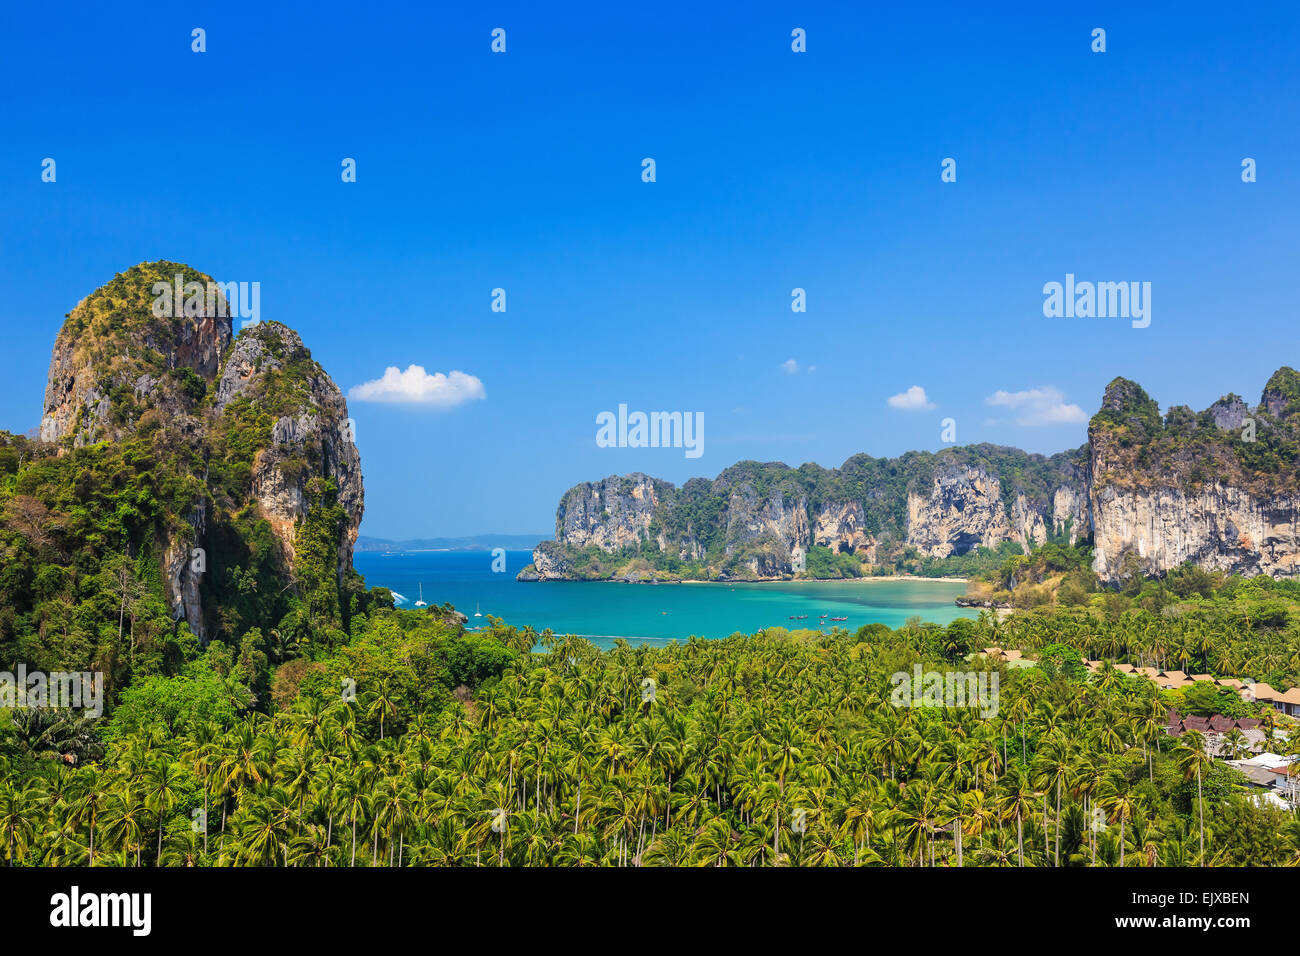 View from the cliff on Railay beach, Ao Nang. Krabi province, Thailand. Stock Photo